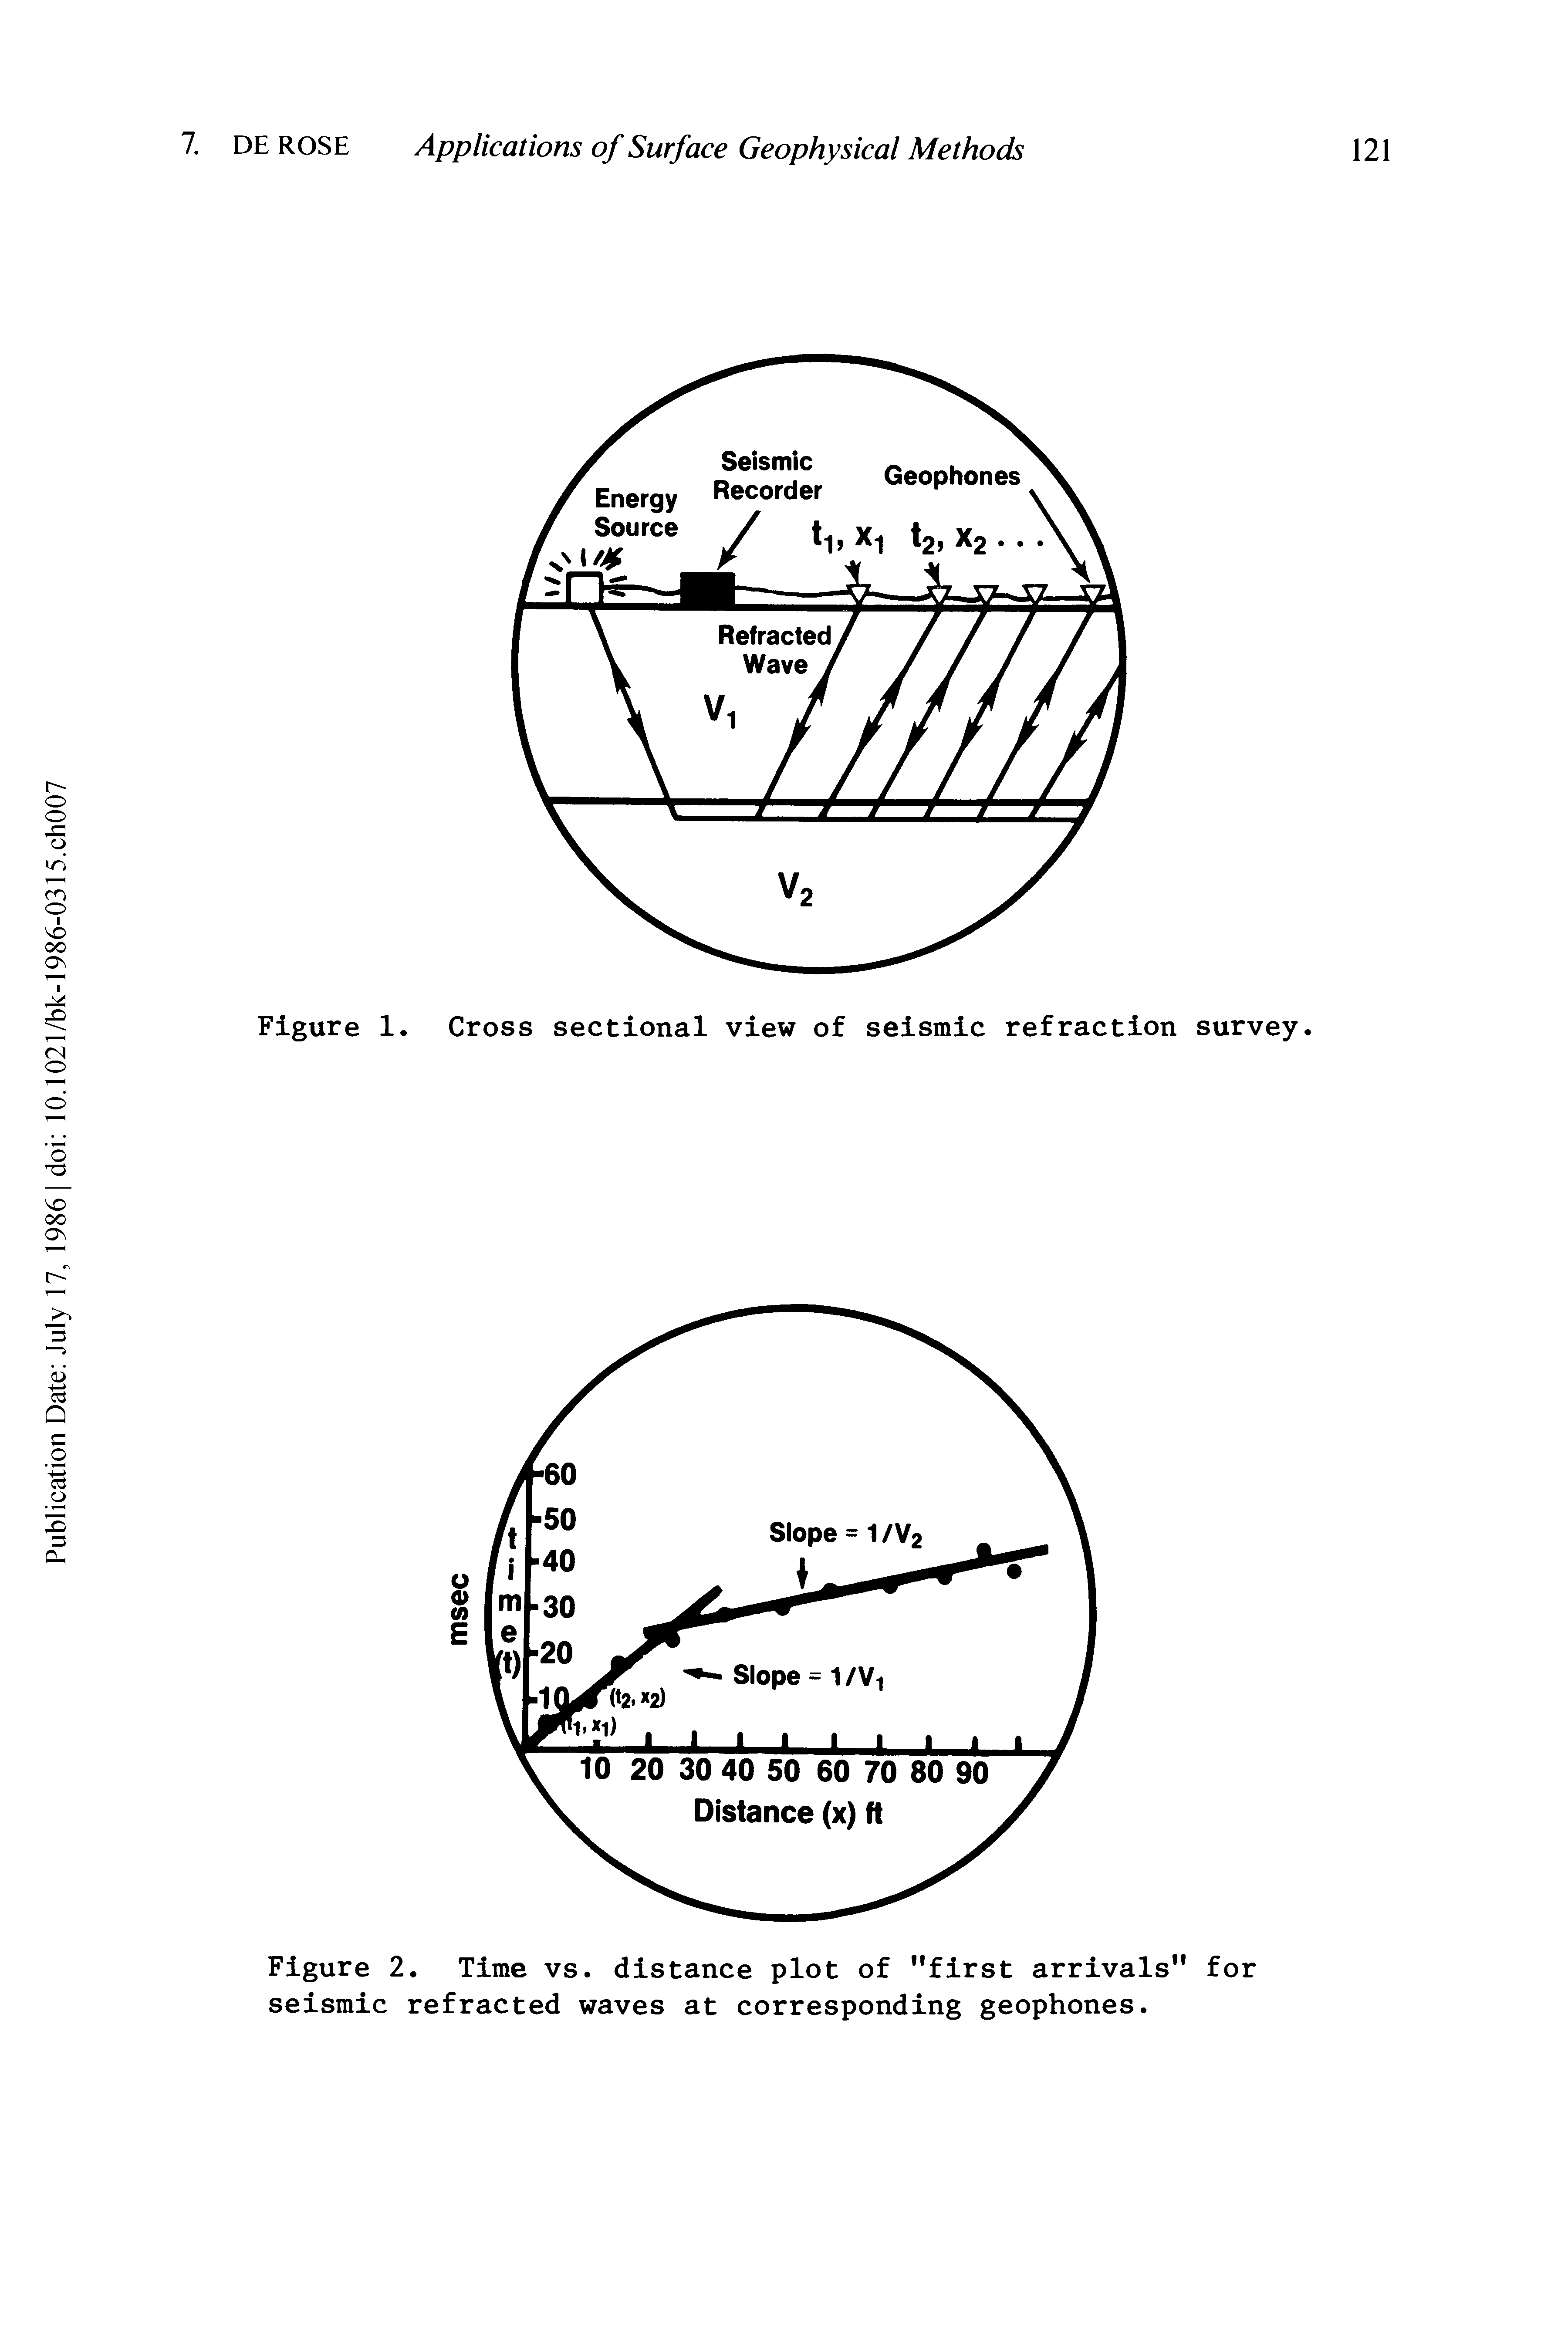 Figure 2. Time vs. distance plot of "first arrivals" for seismic refracted waves at corresponding geophones.